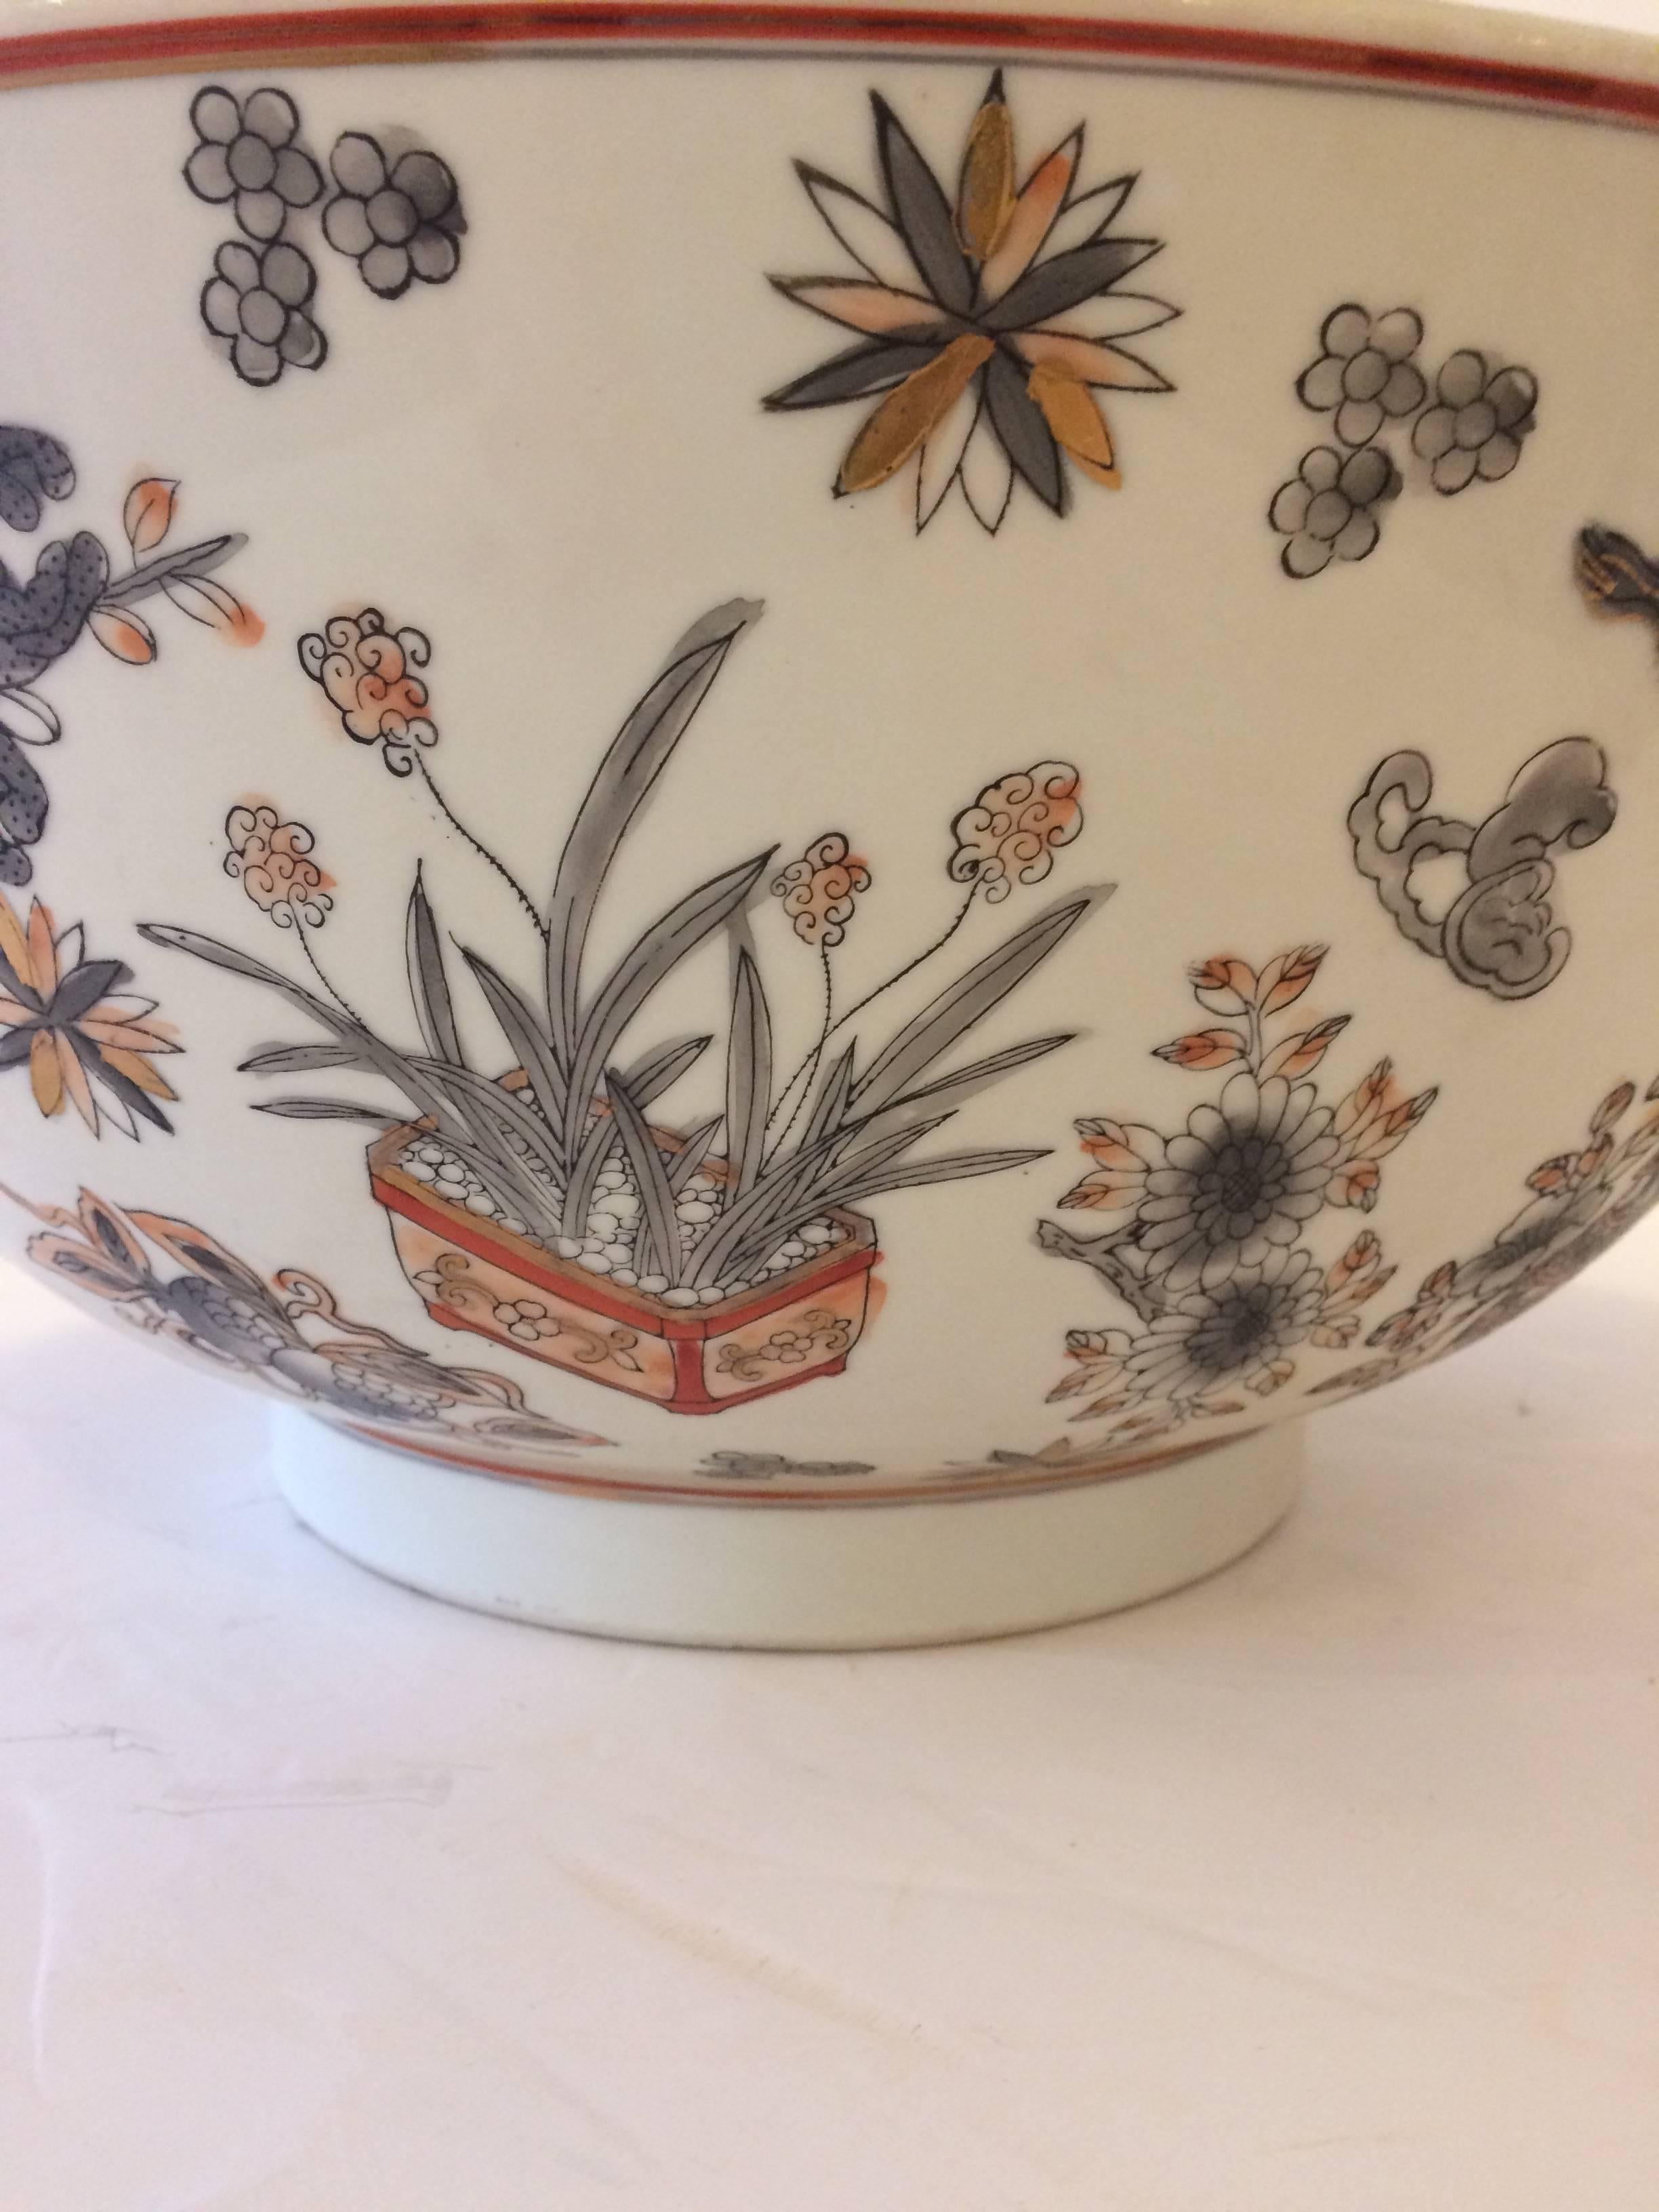 Magnificent Large Chinese Porcelain Center Bowl or Punch Bowl 3